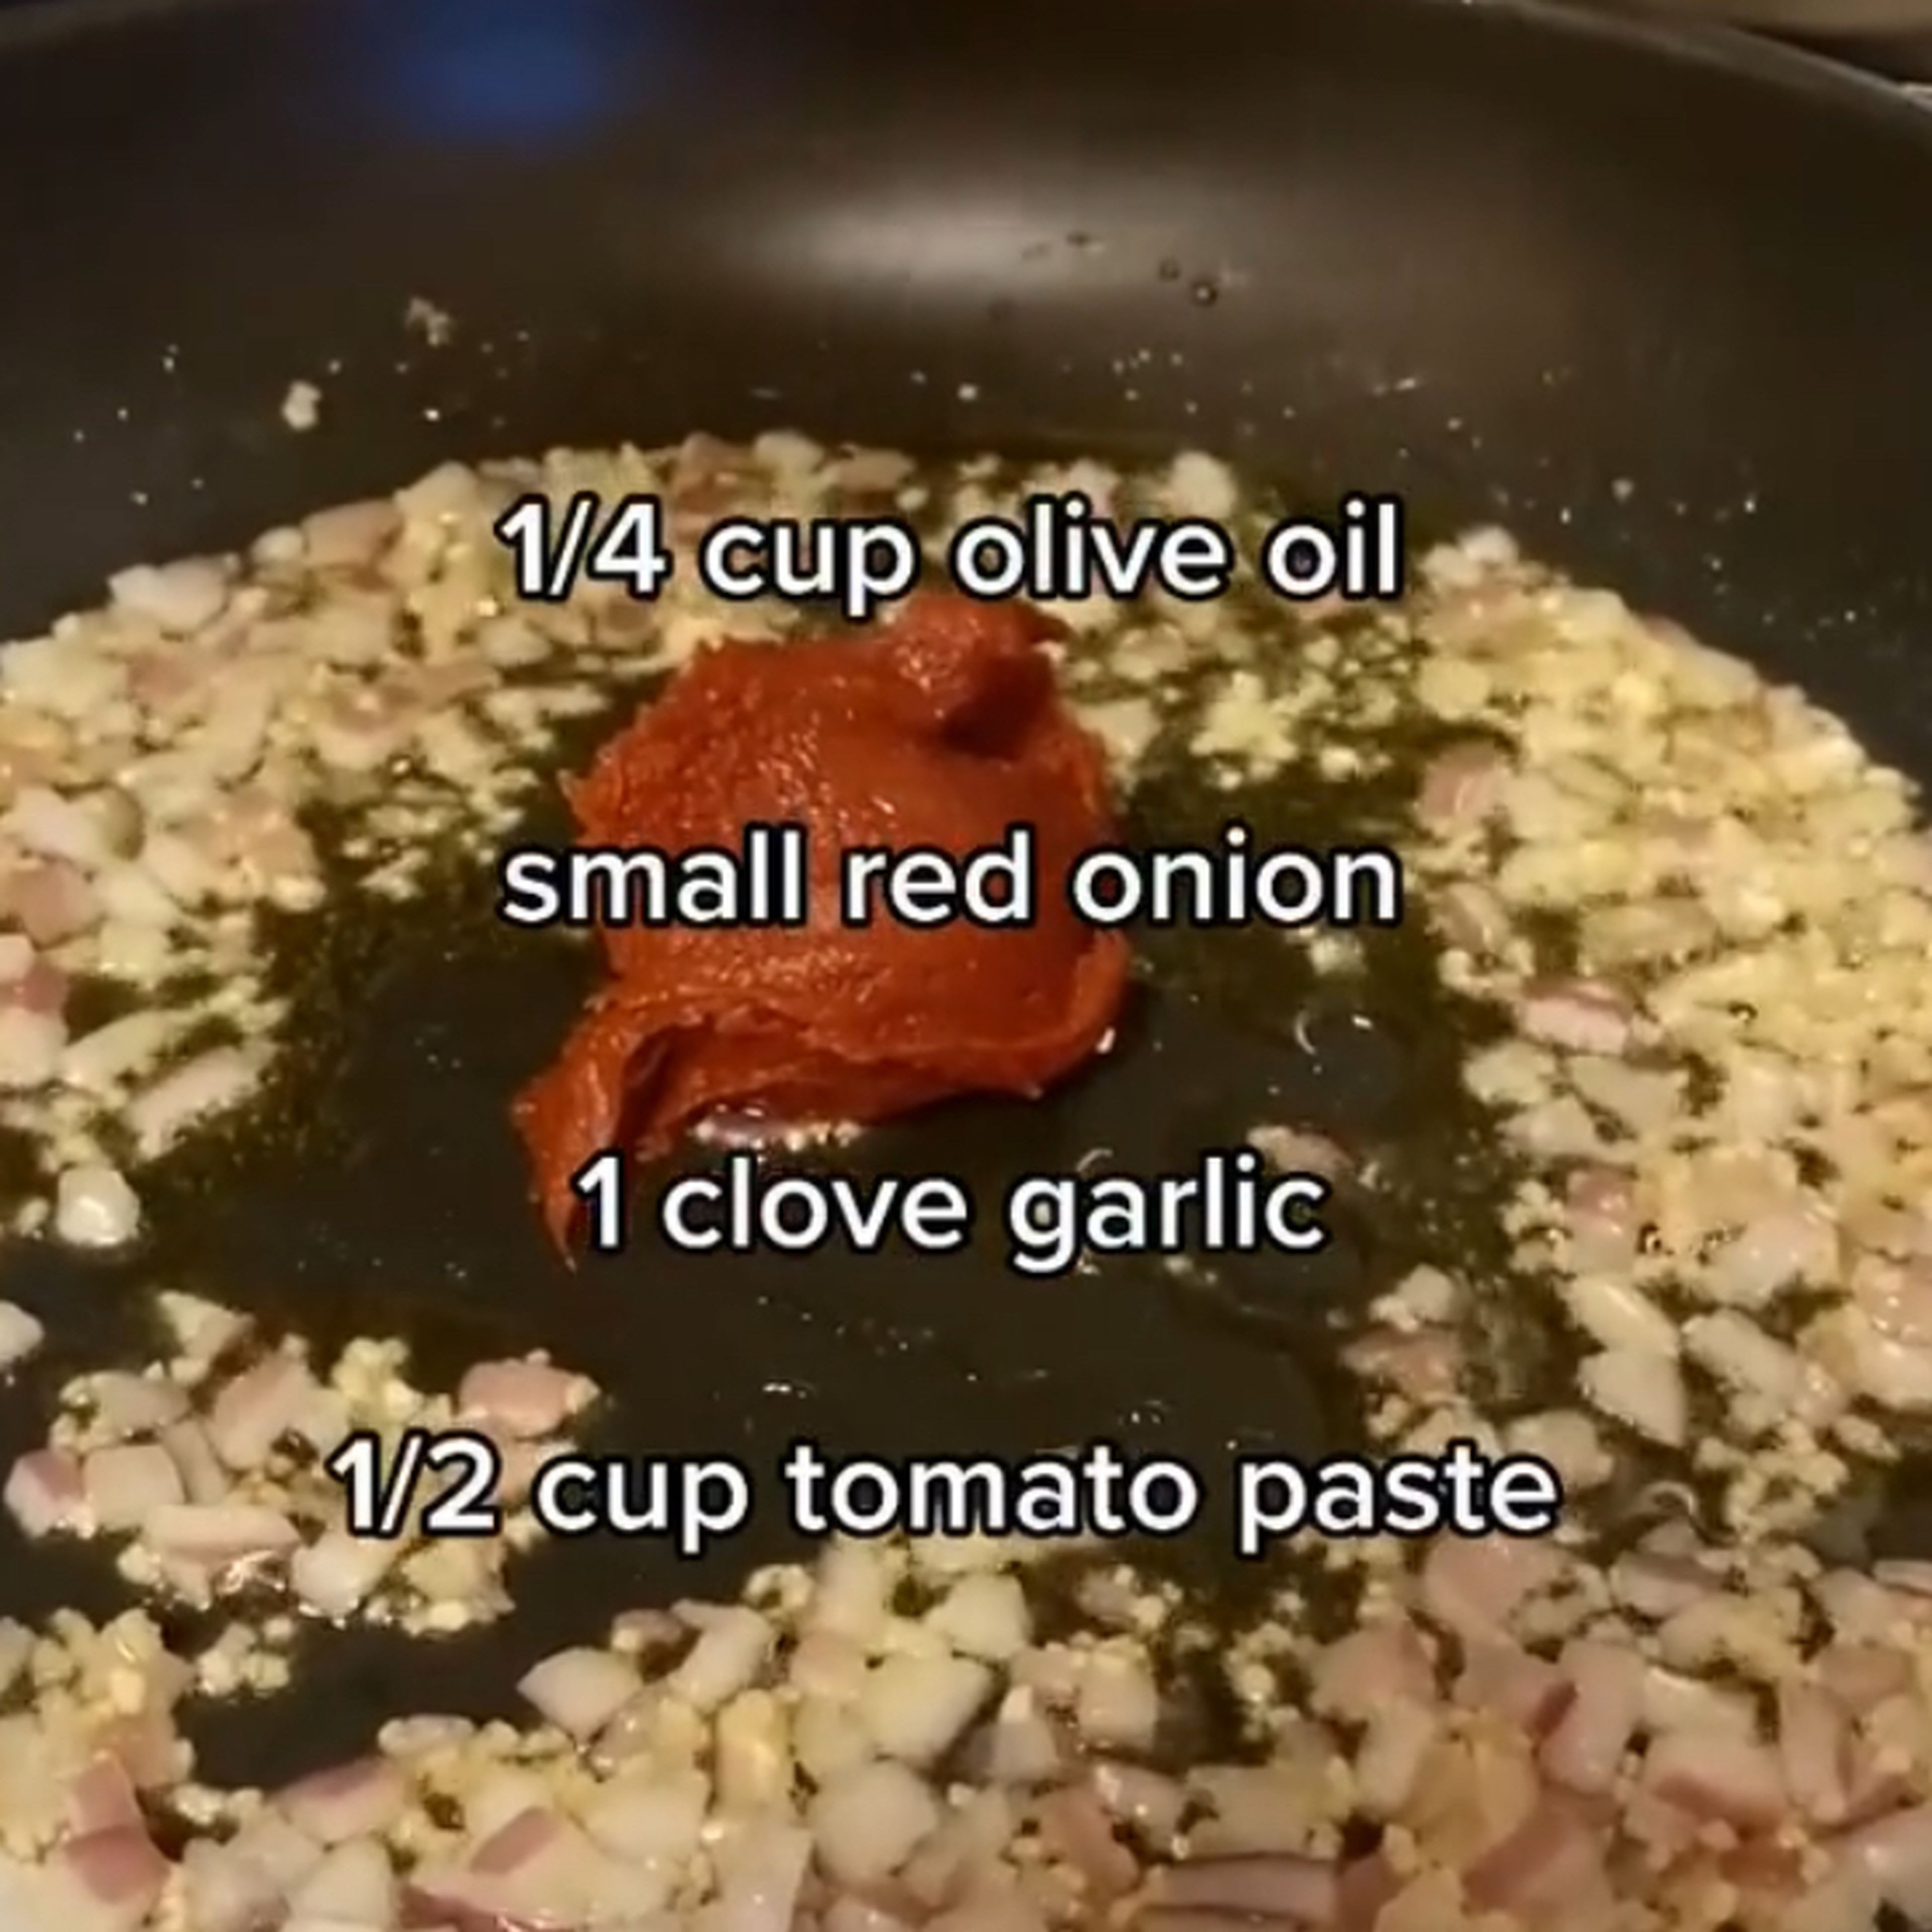 Add the tomato paste and mix.